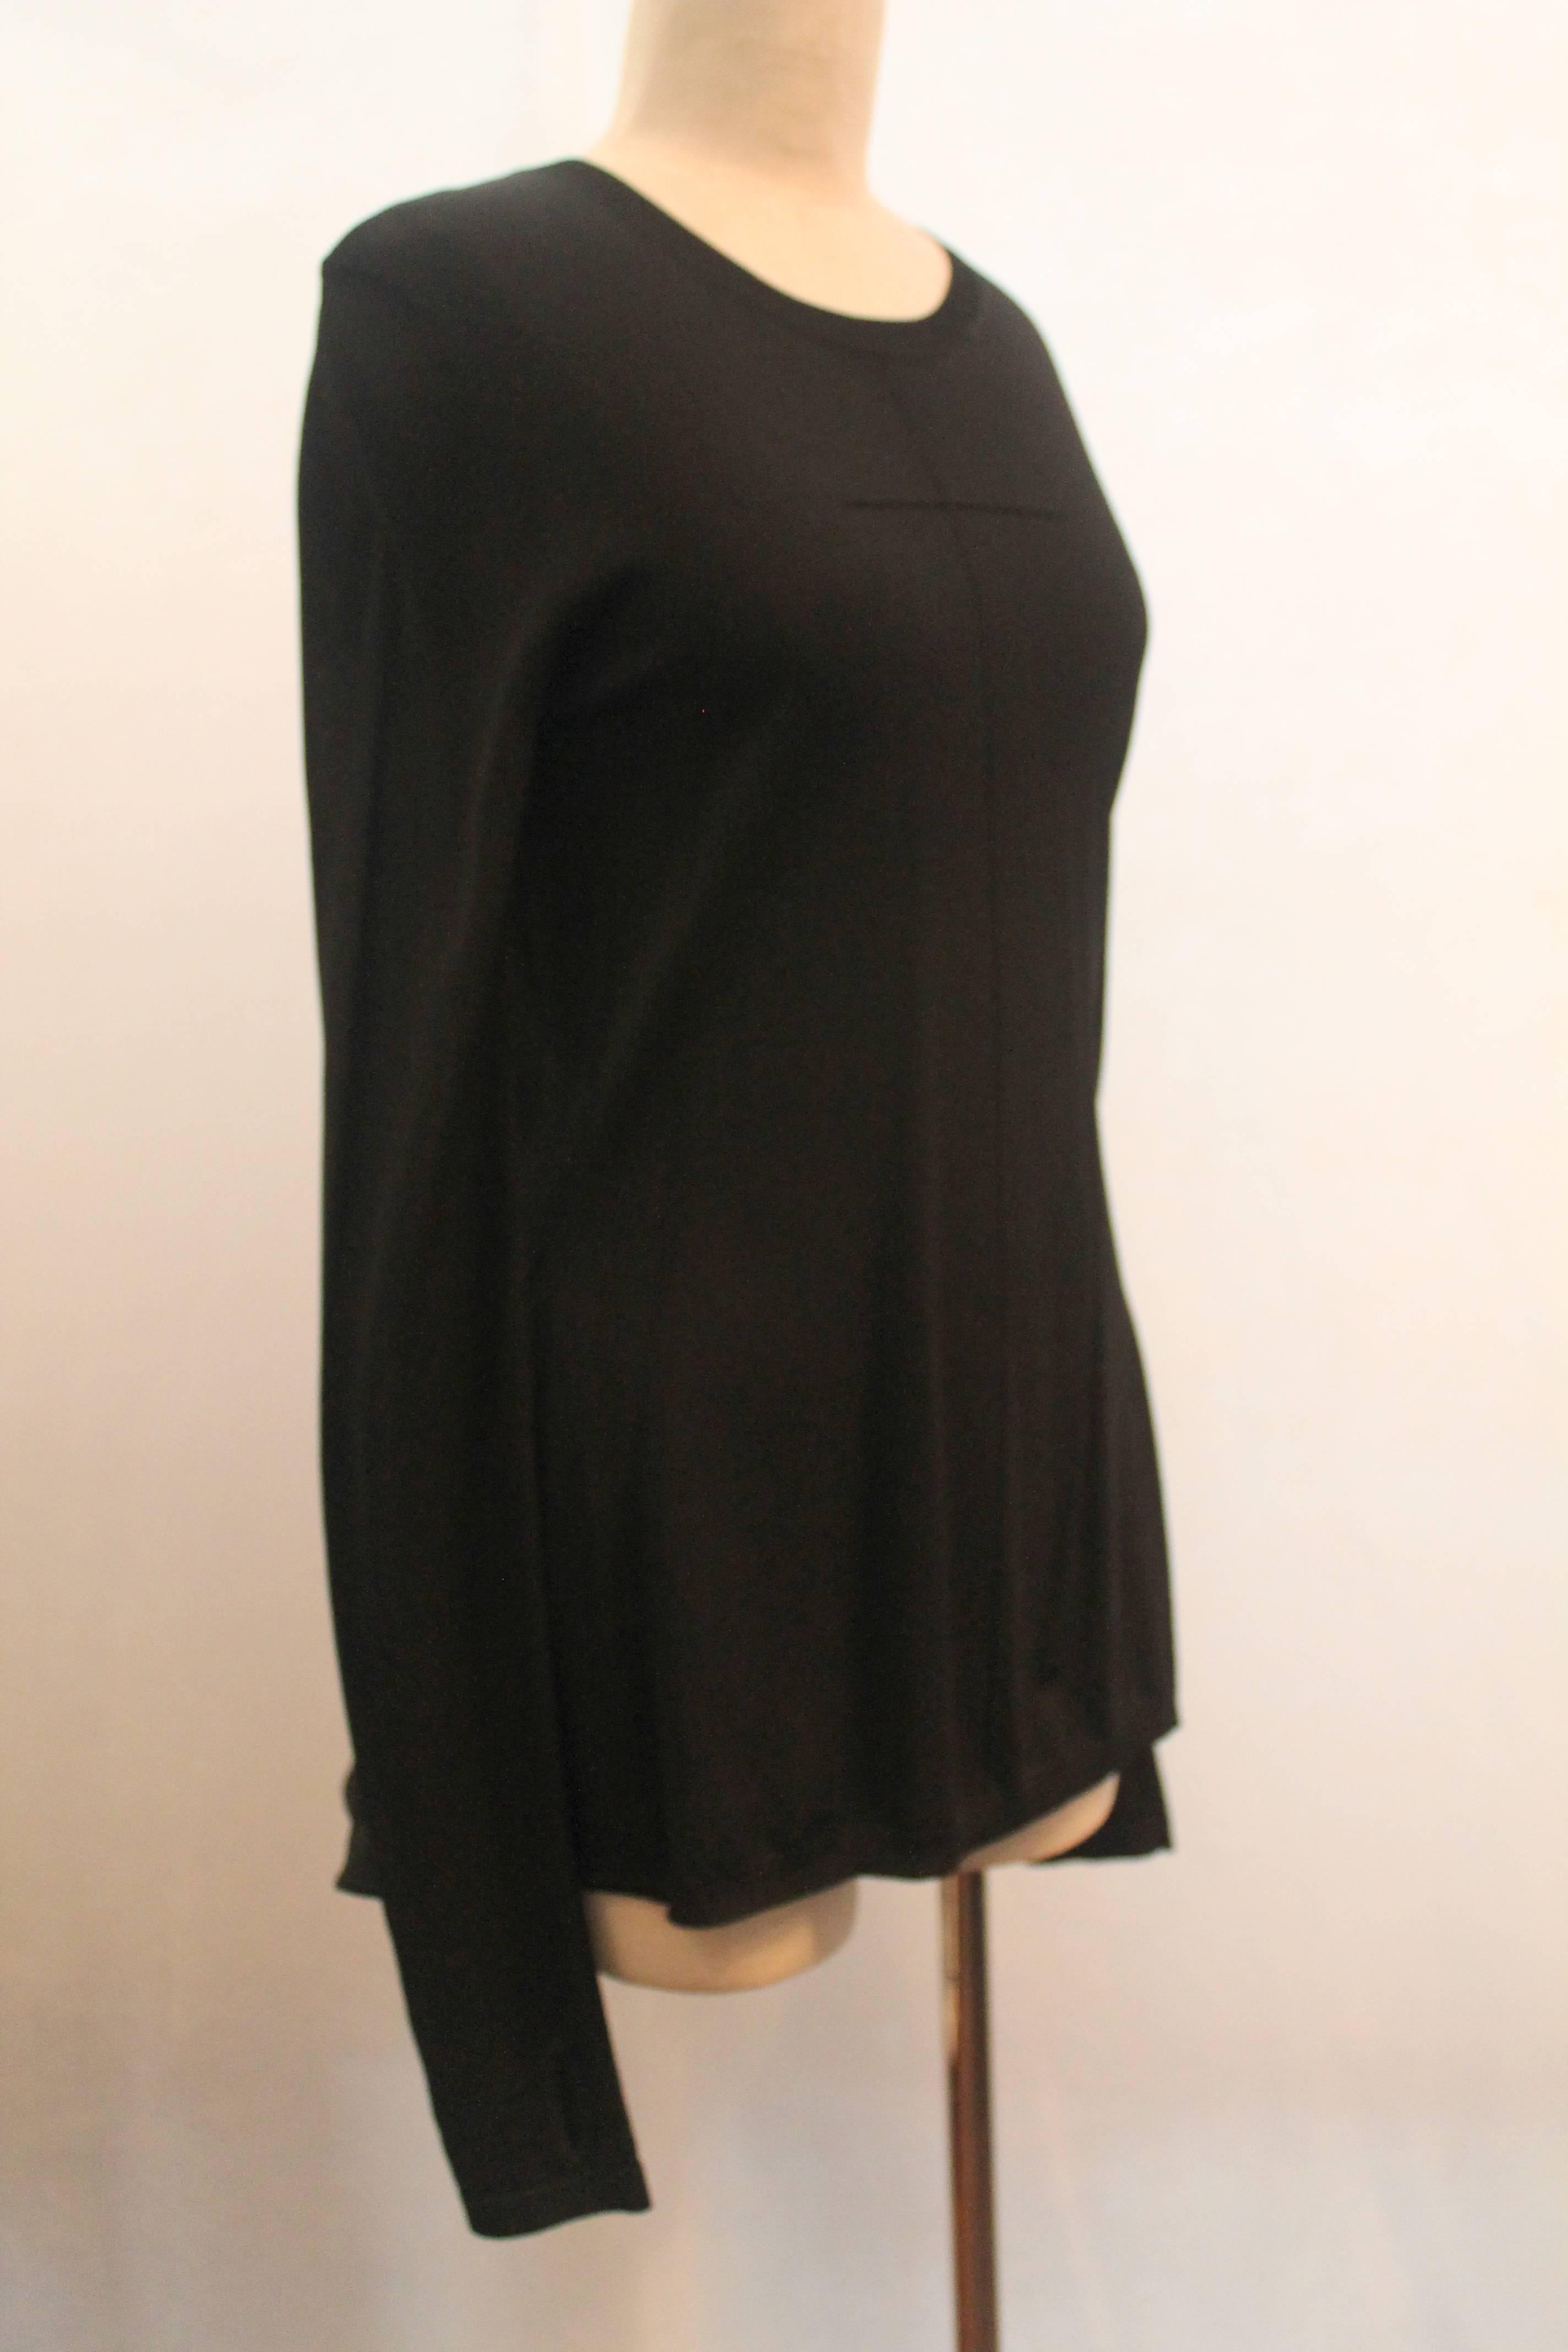 Givenchy Black Long Sleeved Sweater w/ Peplum Back - Medium.  This long polyester sweater has hand inserts at the cuffs and one front pleat.  The back has a slight peplum.  It is in excellent condition.

Measurements:
Bust: 33.5